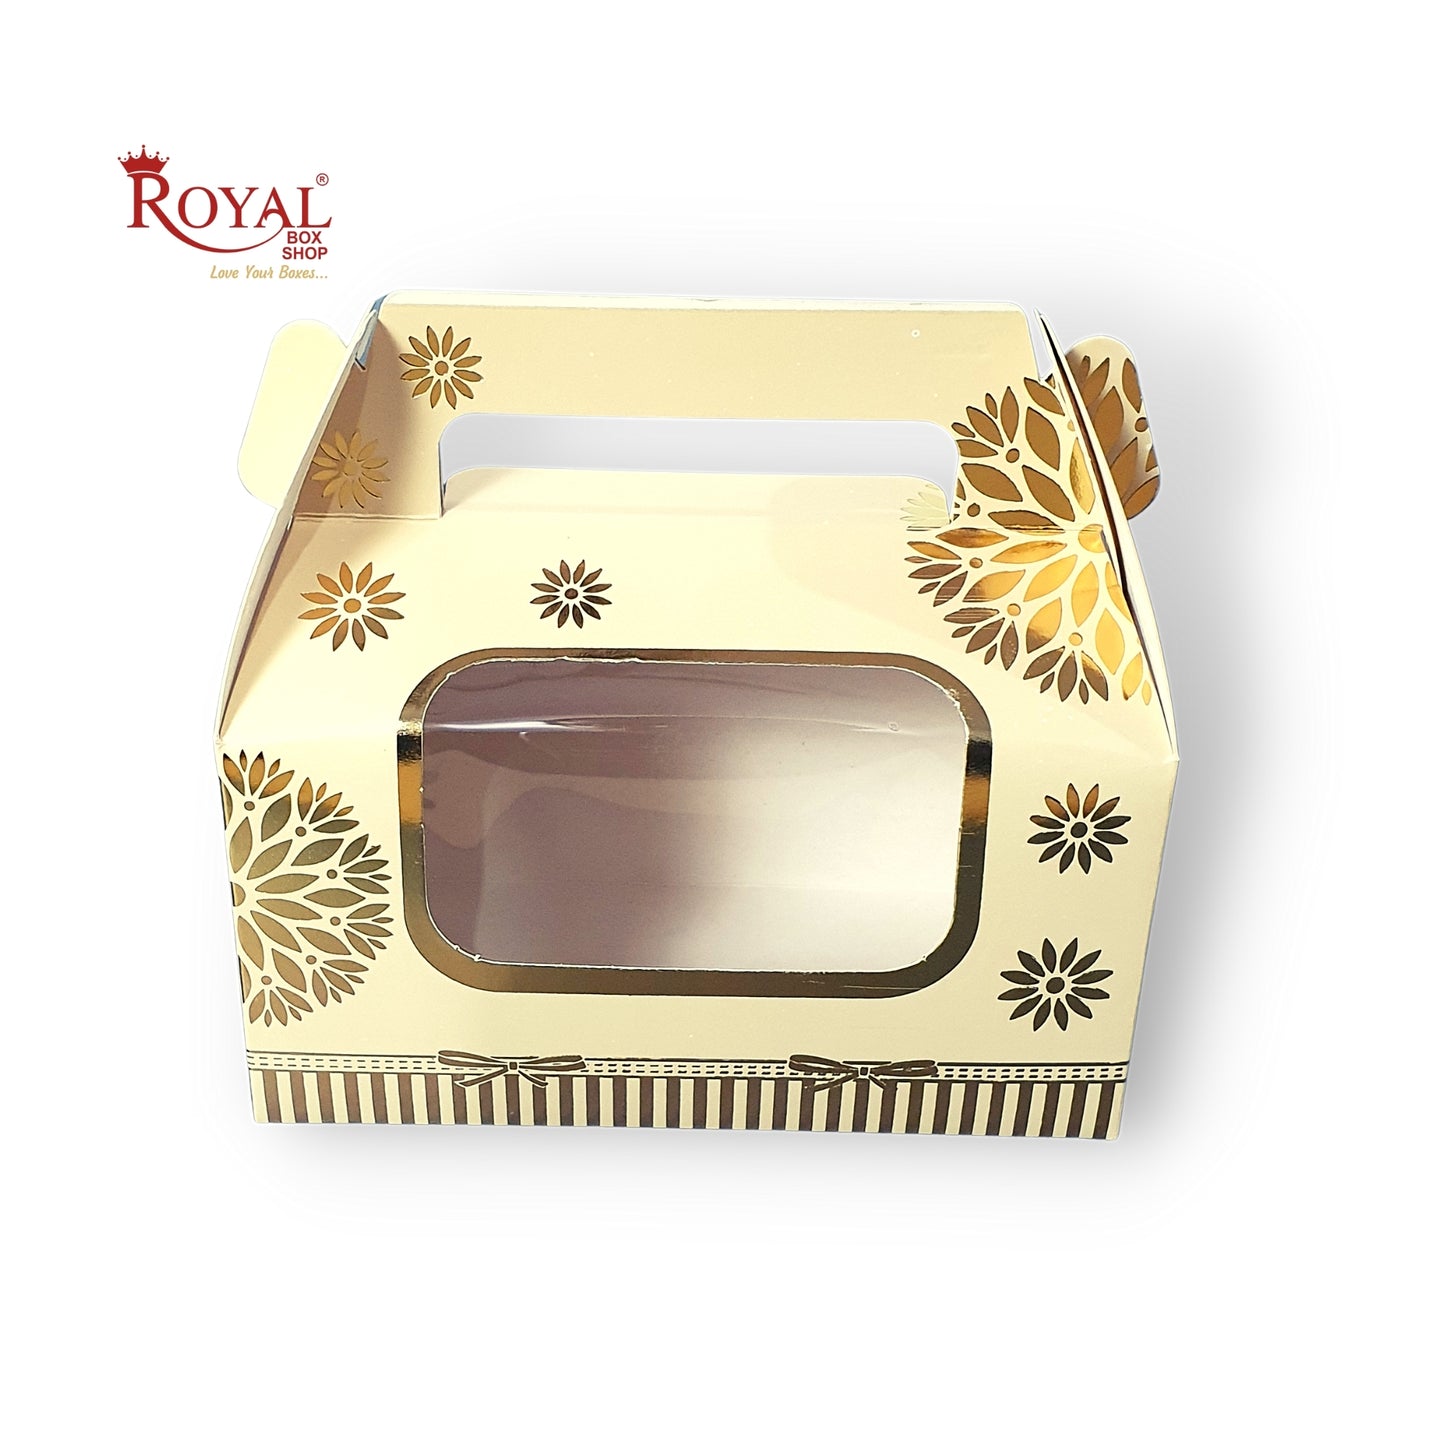 2 Jar Box With Handle I Beige Gold Foiling Print I 7"x3.5"x3.5" inches I For Return Favor Gifts, Dryfruits Gift Bags